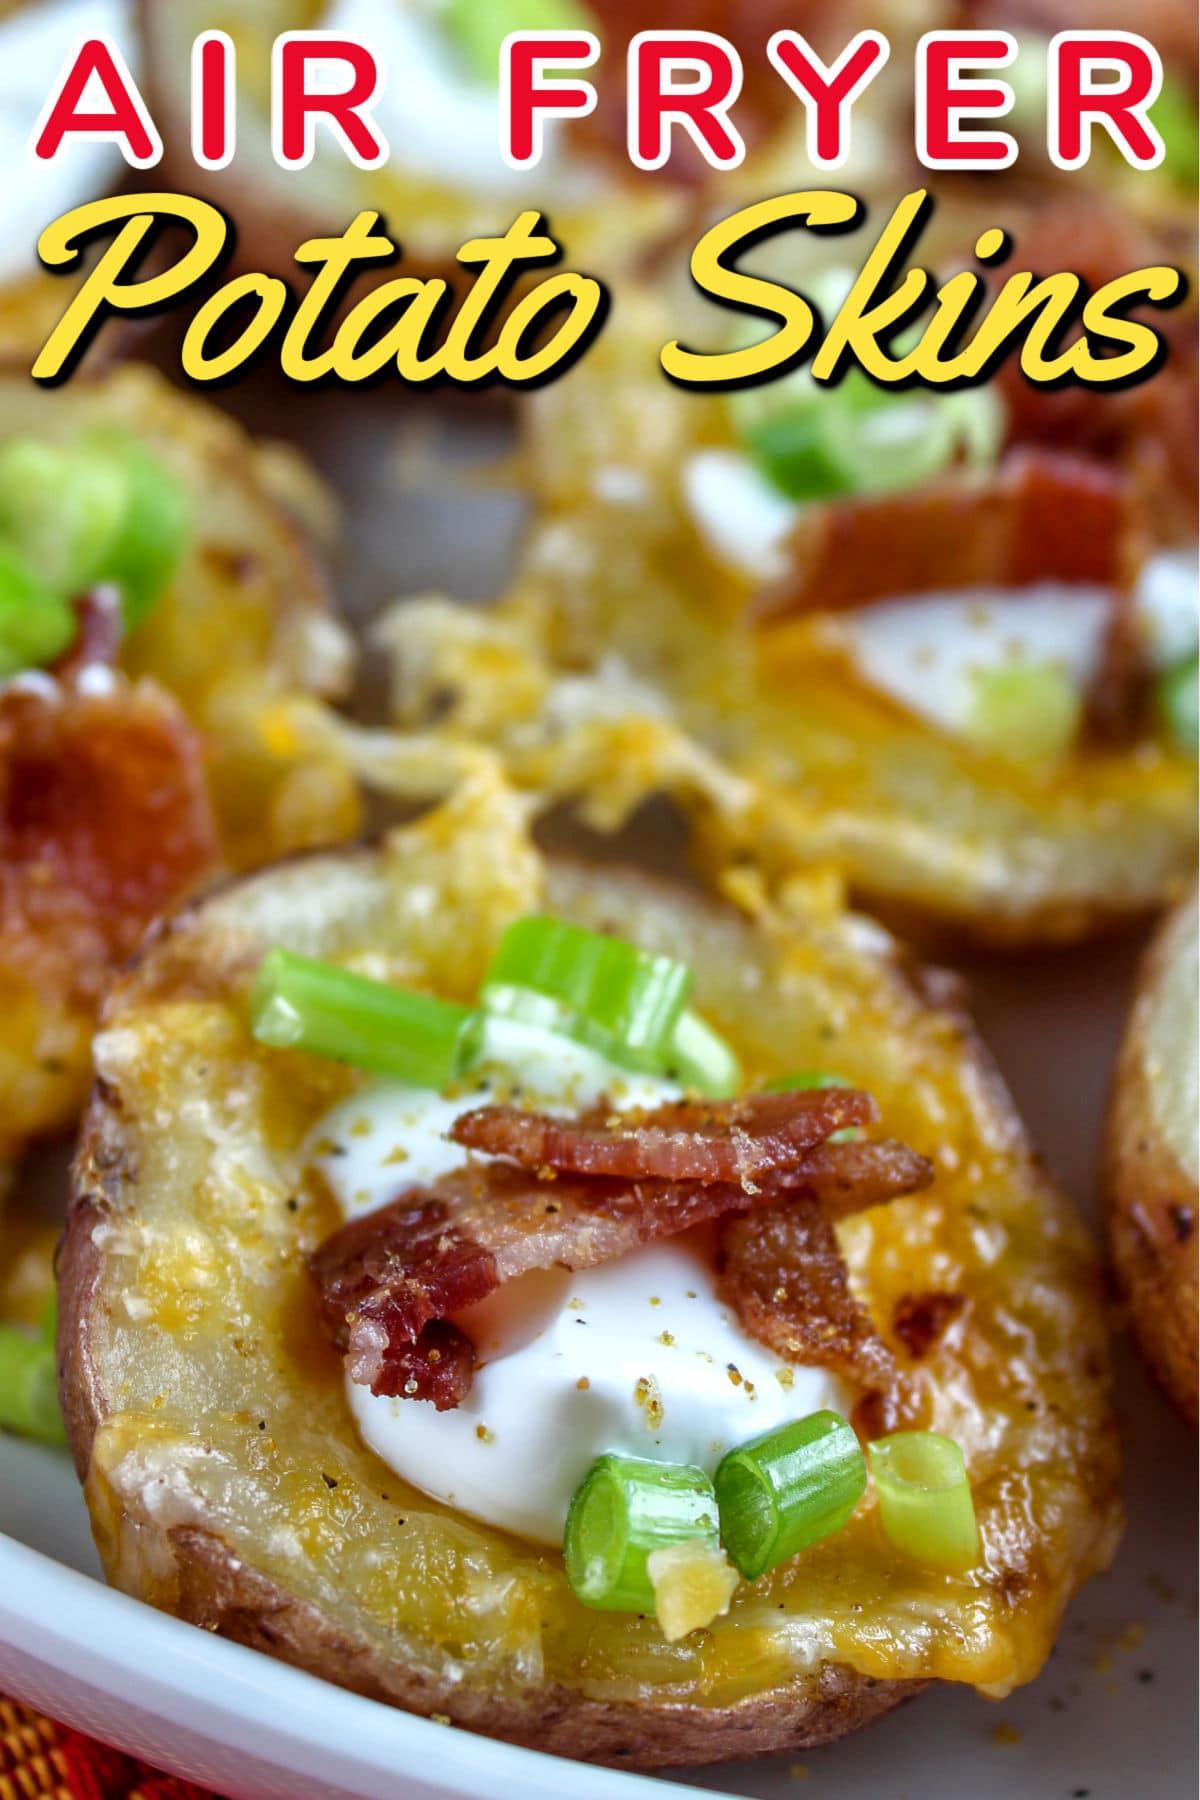 I'm a SUCKER for potato skins - I mean - what's not to love? I've never made them at home - until now! These air fryer potato skins are so much quicker and man on man - I can tell you - I ate the whole plateful. Oye! Cheese, bacon, sour cream - I'm hungry again already!  via @foodhussy